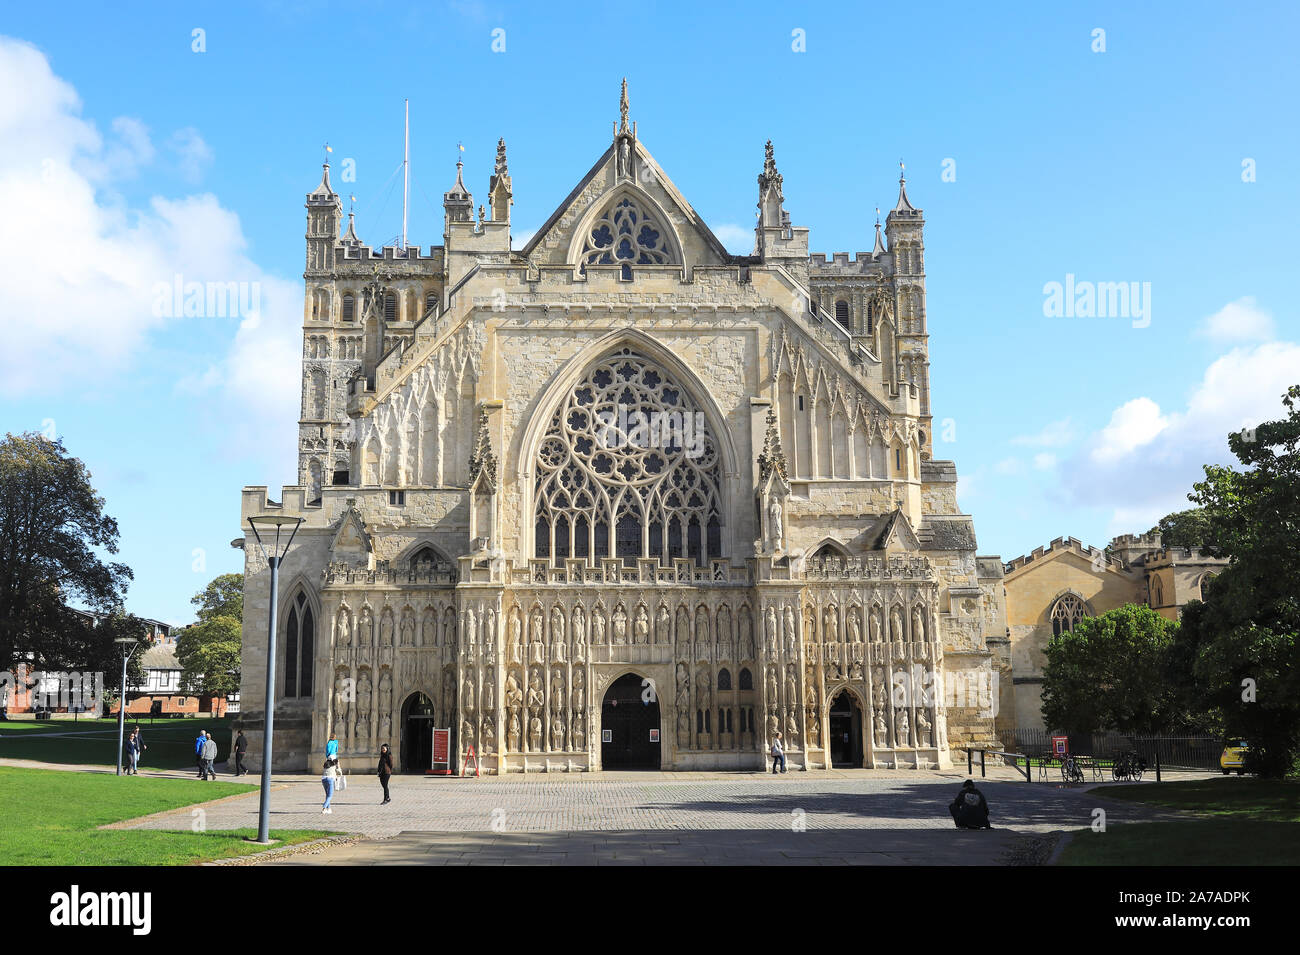 The medieval carvings of the West Front Image Screen of Exeter Cathedral on Cathedral Green in the autumn sunshine, in Devon, UK Stock Photo